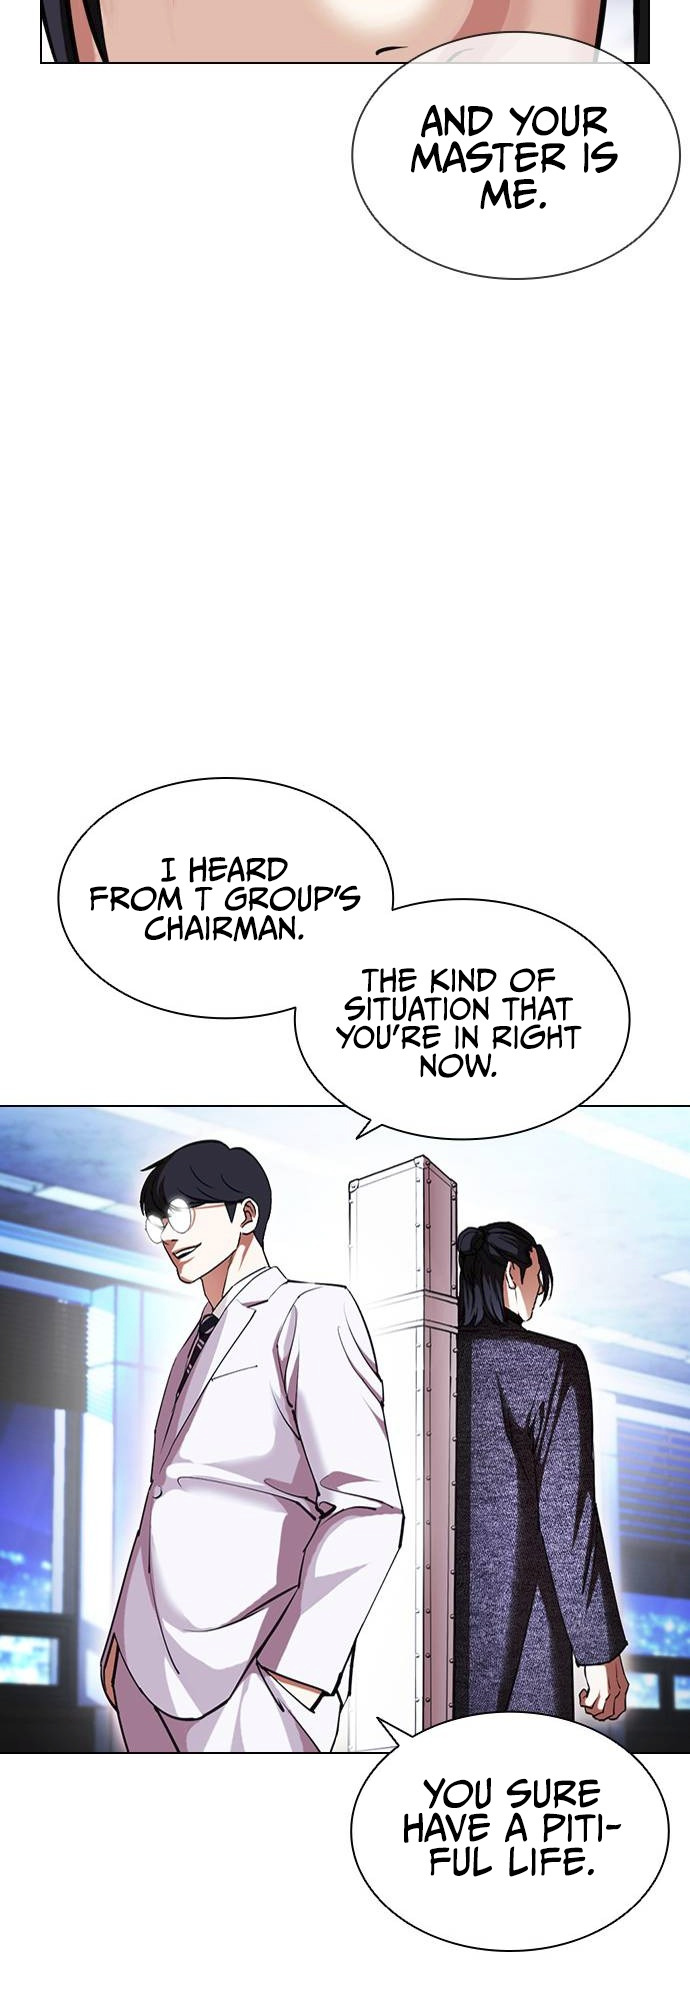 Lookism Chapter 415 image 014